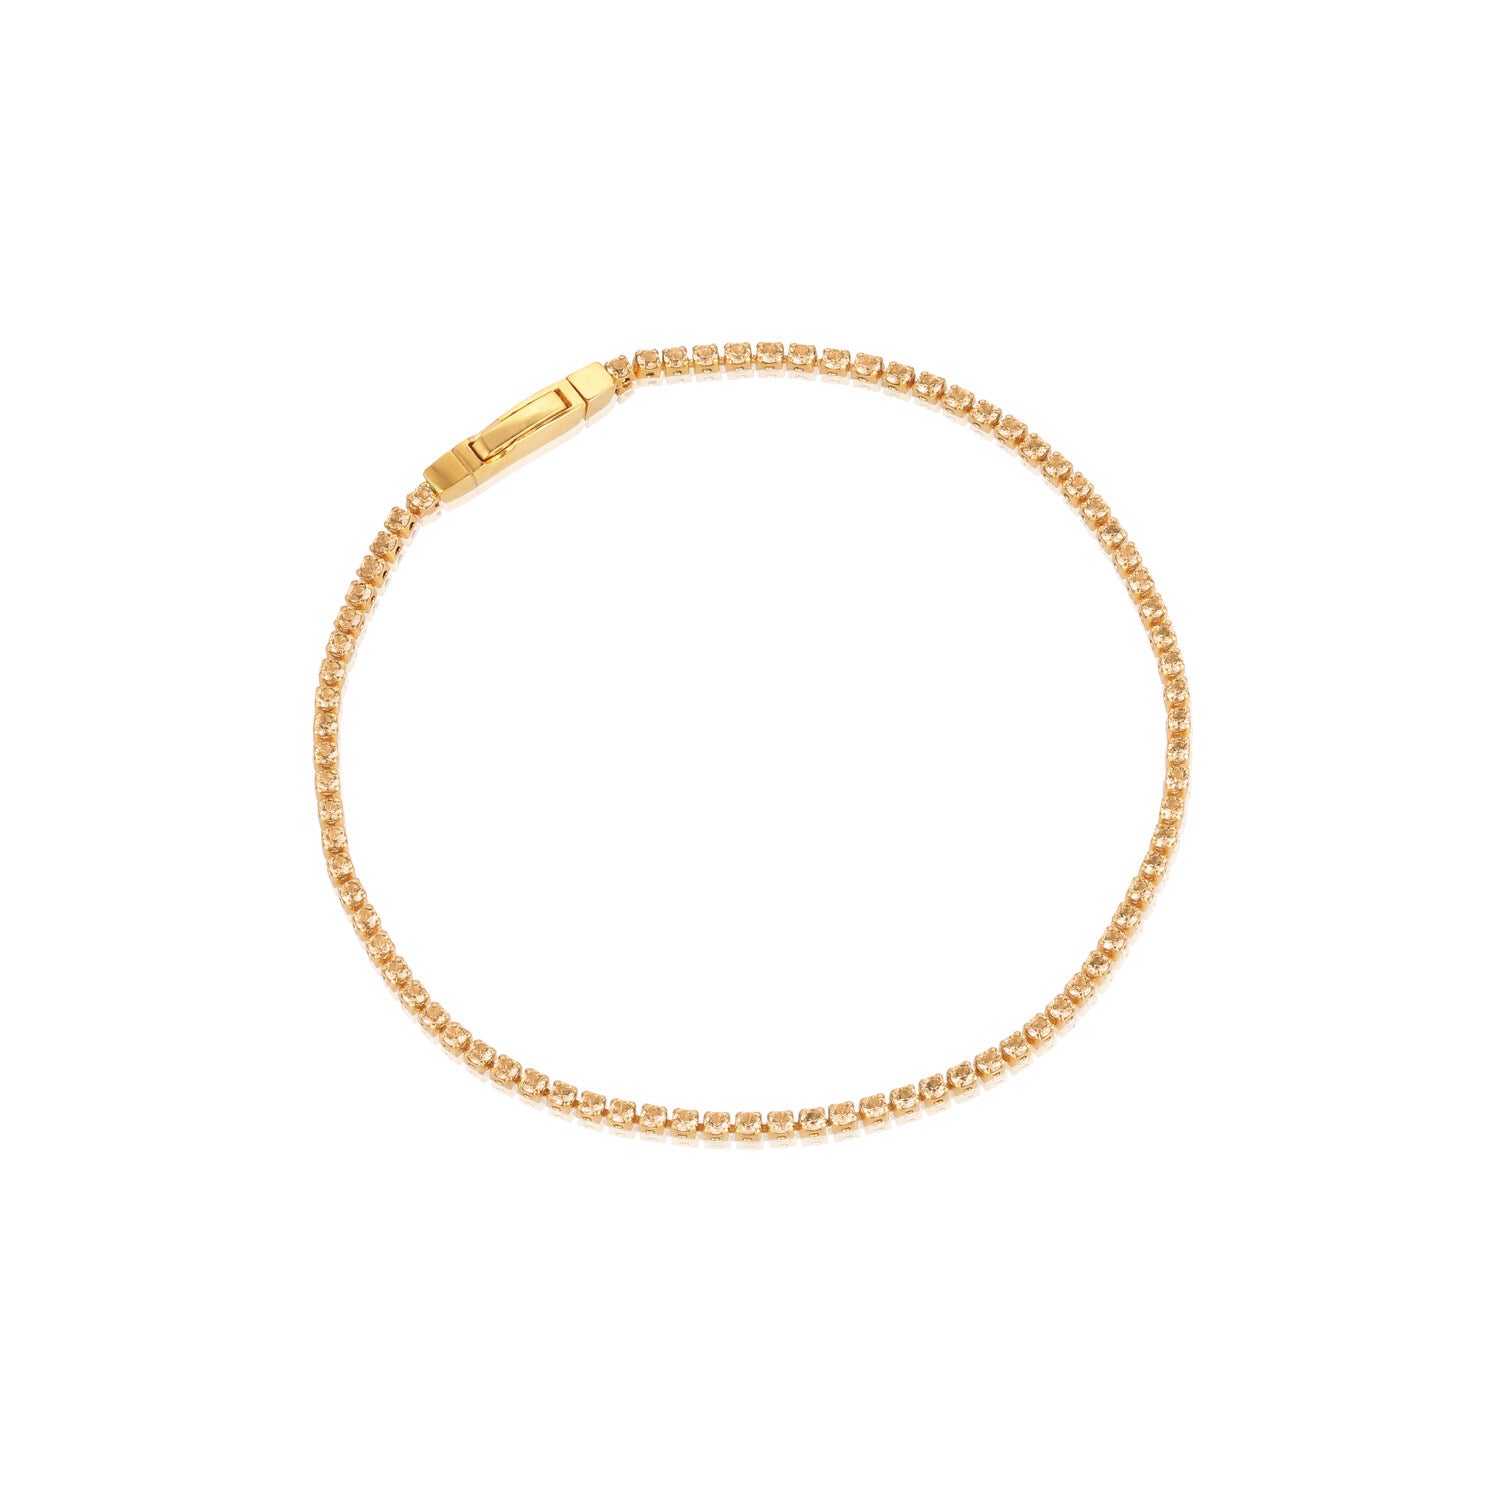 18K gold plated | Champagne | 19 cm, 18K gold plated | Champagne | 18 cm, 18K gold plated | Champagne | 17 cm, 18K gold plated | Champagne | 16 cm